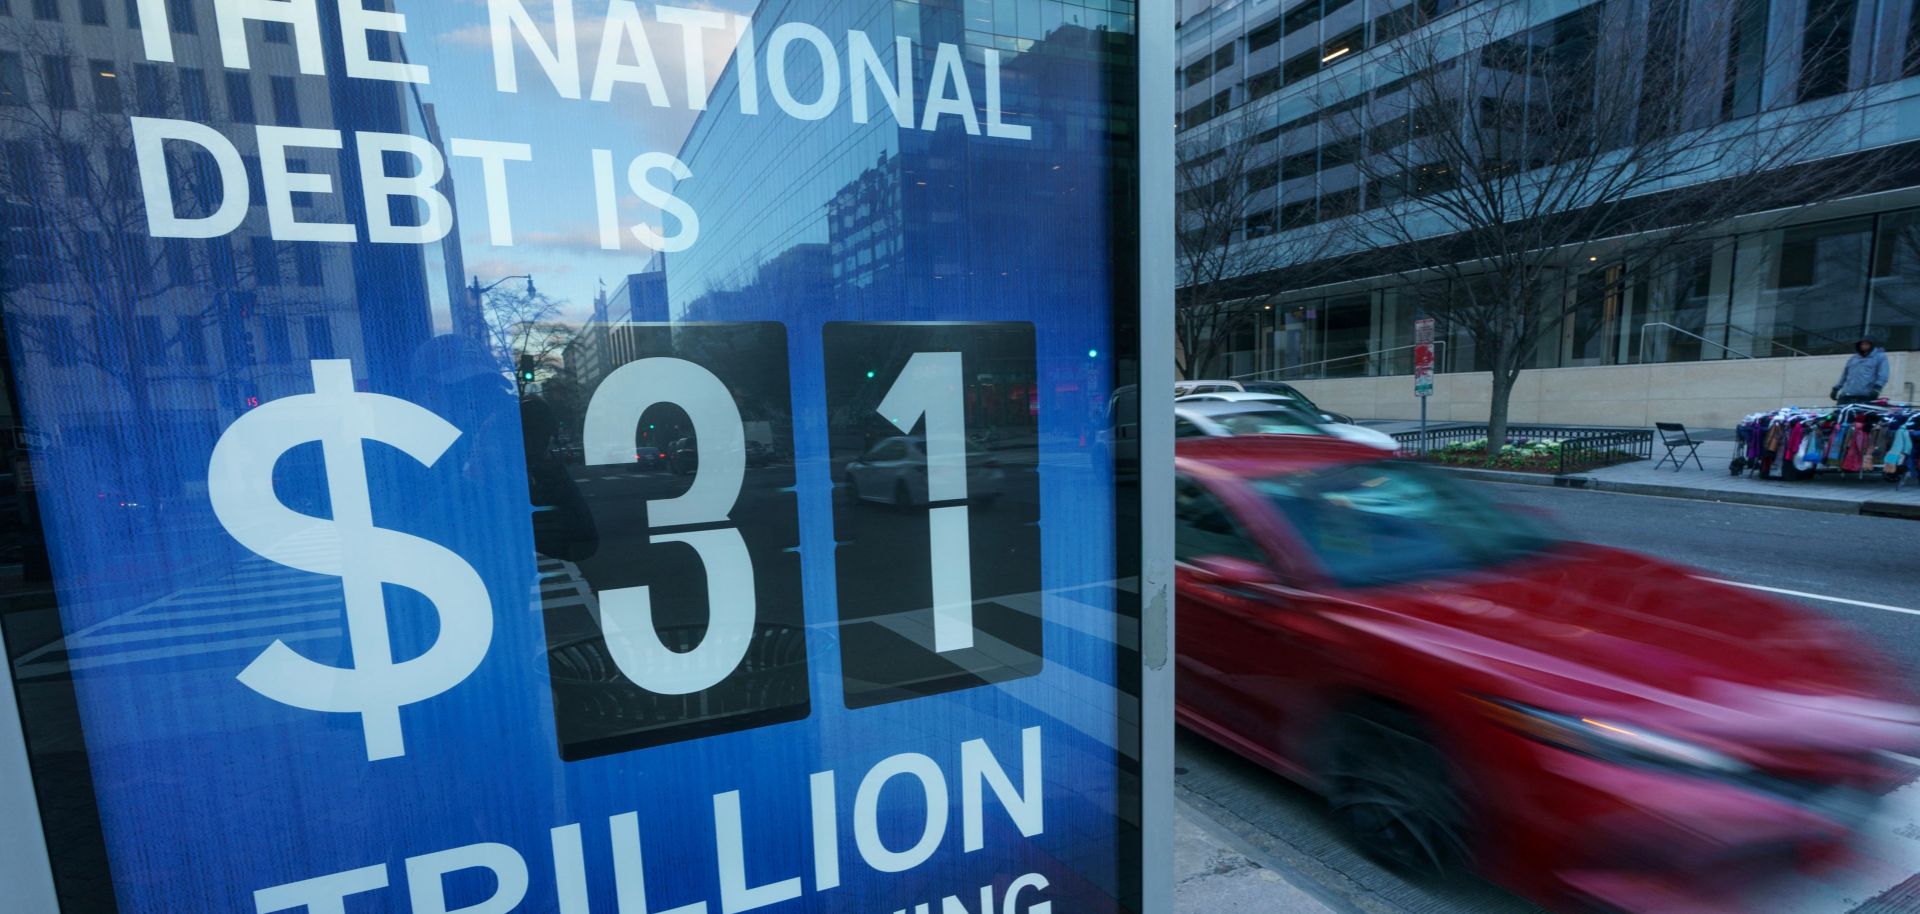 A sign at a bus shelter shows the national debt in Washington, D.C., on Jan. 20, 2023.